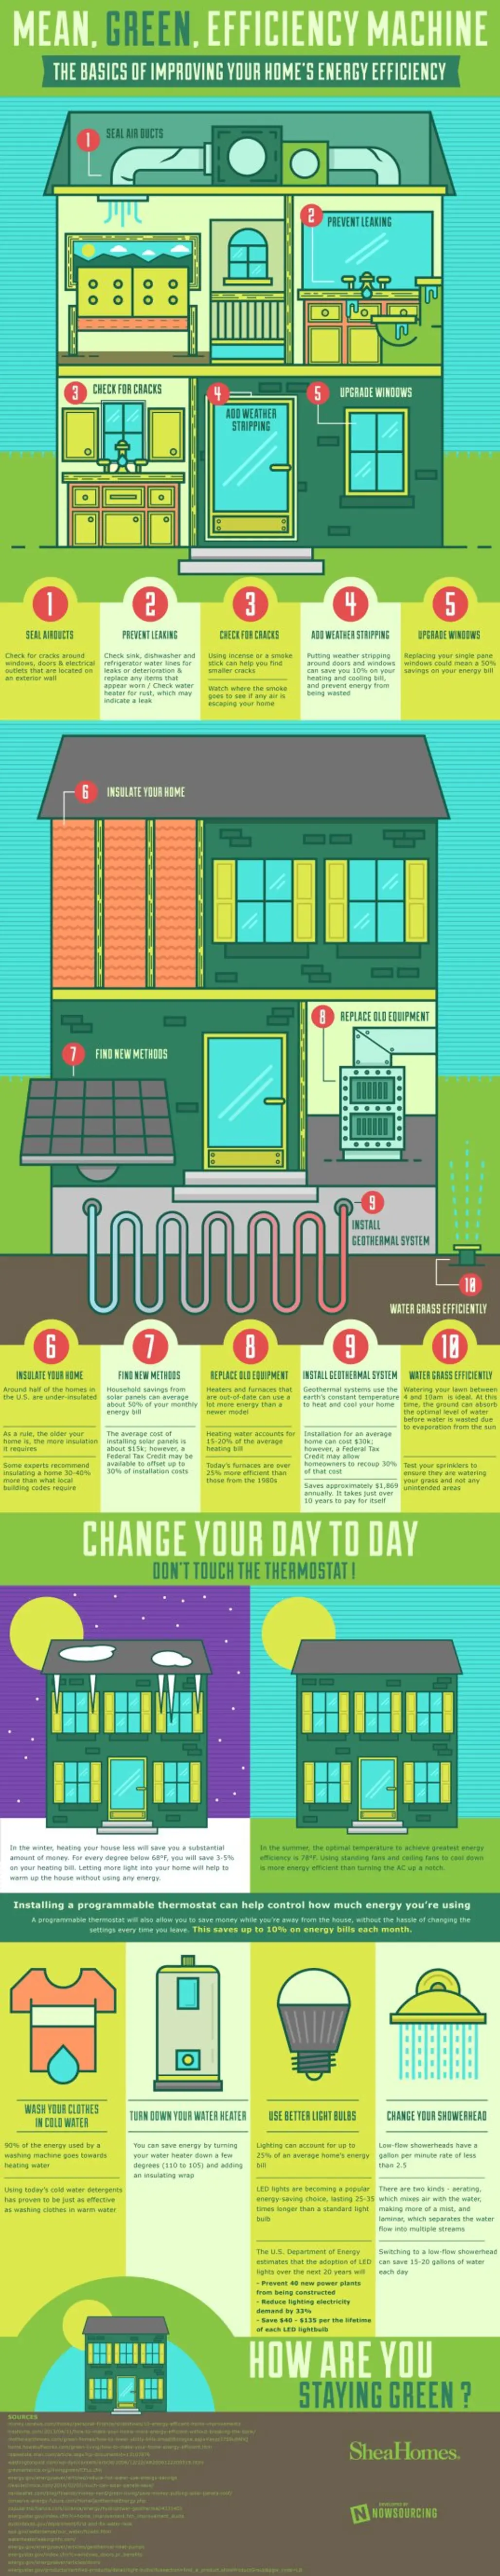 Become More Energy Efficient at Home